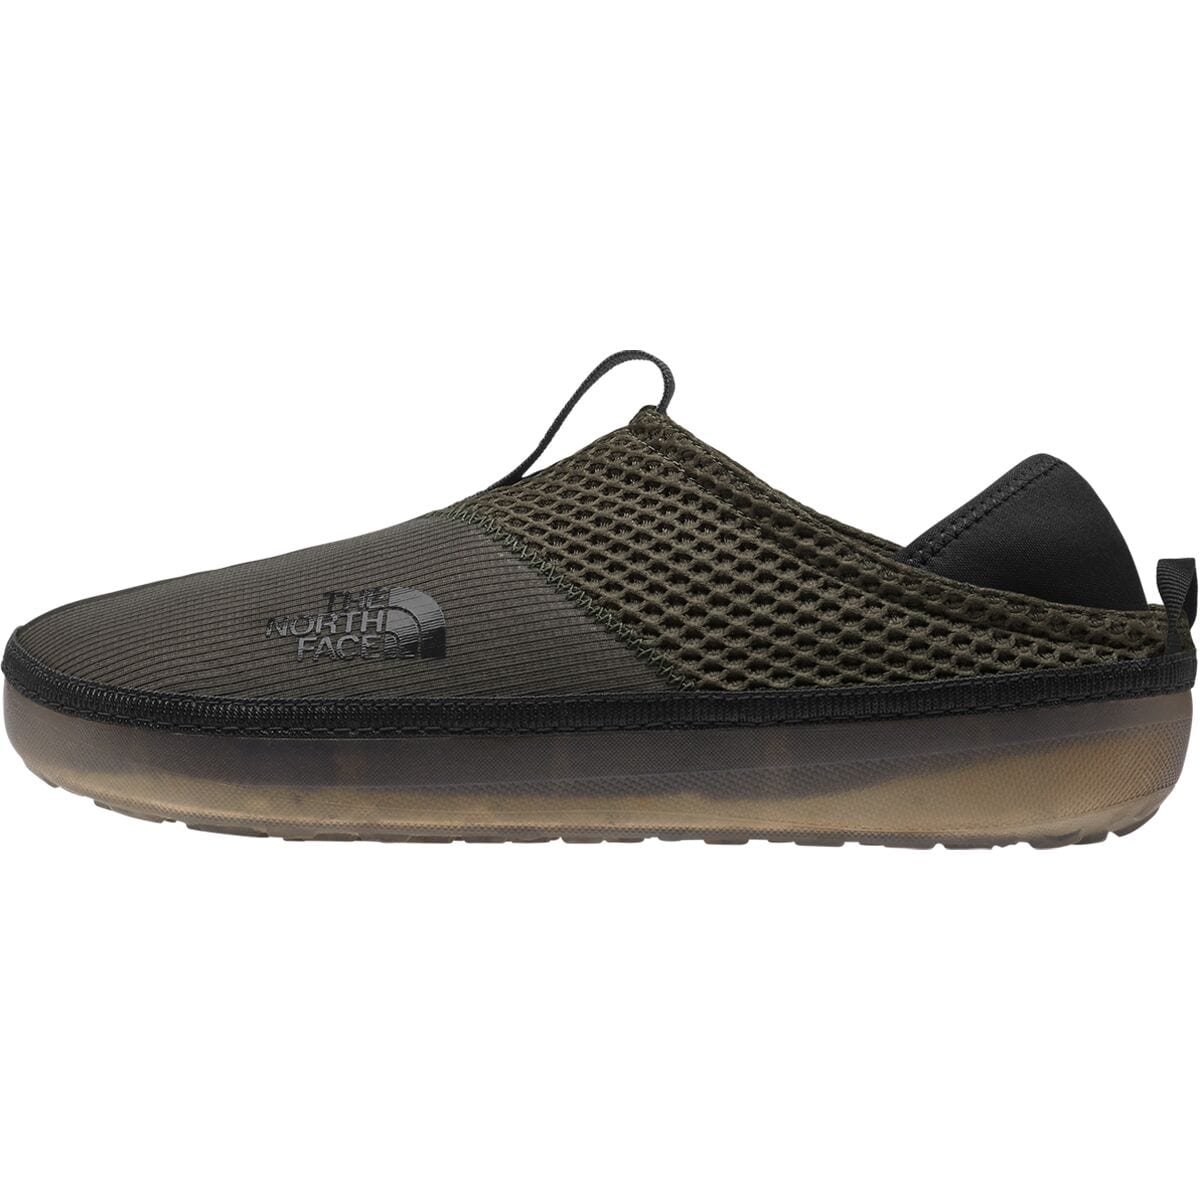 The North Face Base Camp Mule Shoe - Footwear